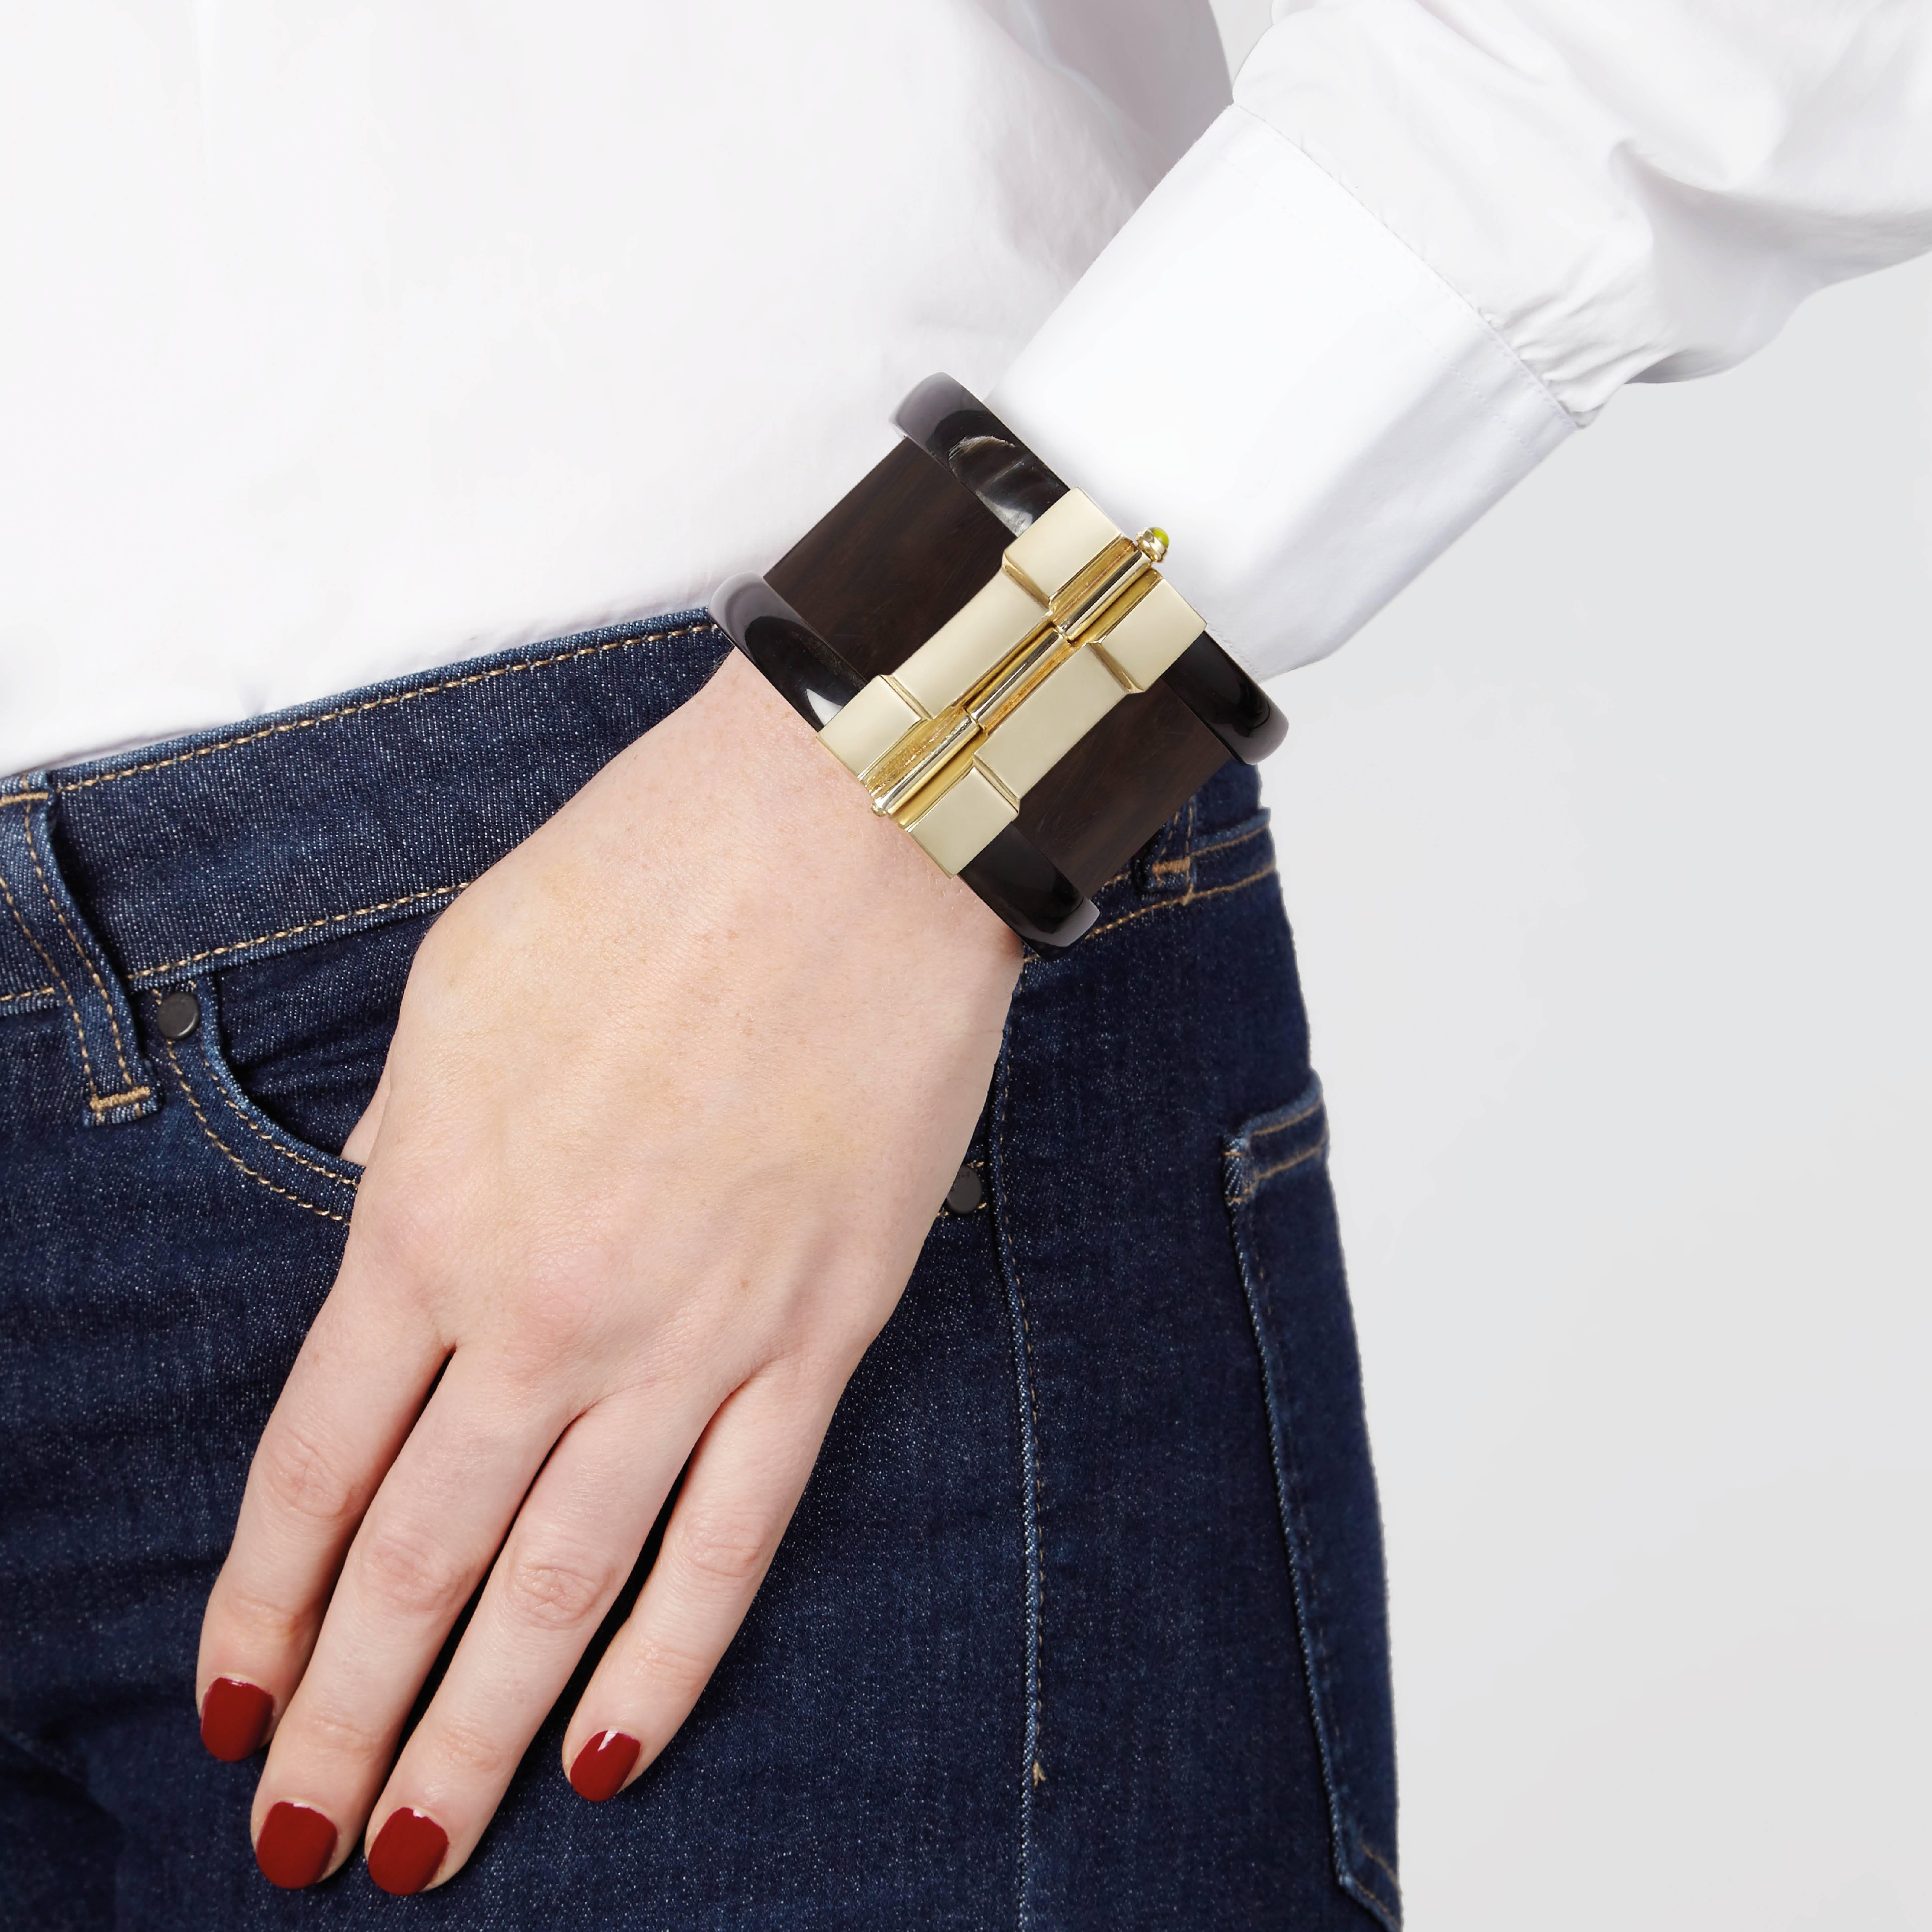 Cuff bracelet crafted by hand from ebony wood and African cow horn. The customizable 18k gold plate pin-clasp is set with choice or ruby or emerald. Inspired by warrior style cuffs worn by former Vogue editor Diana Vreeland. 

Each cuff is handmade